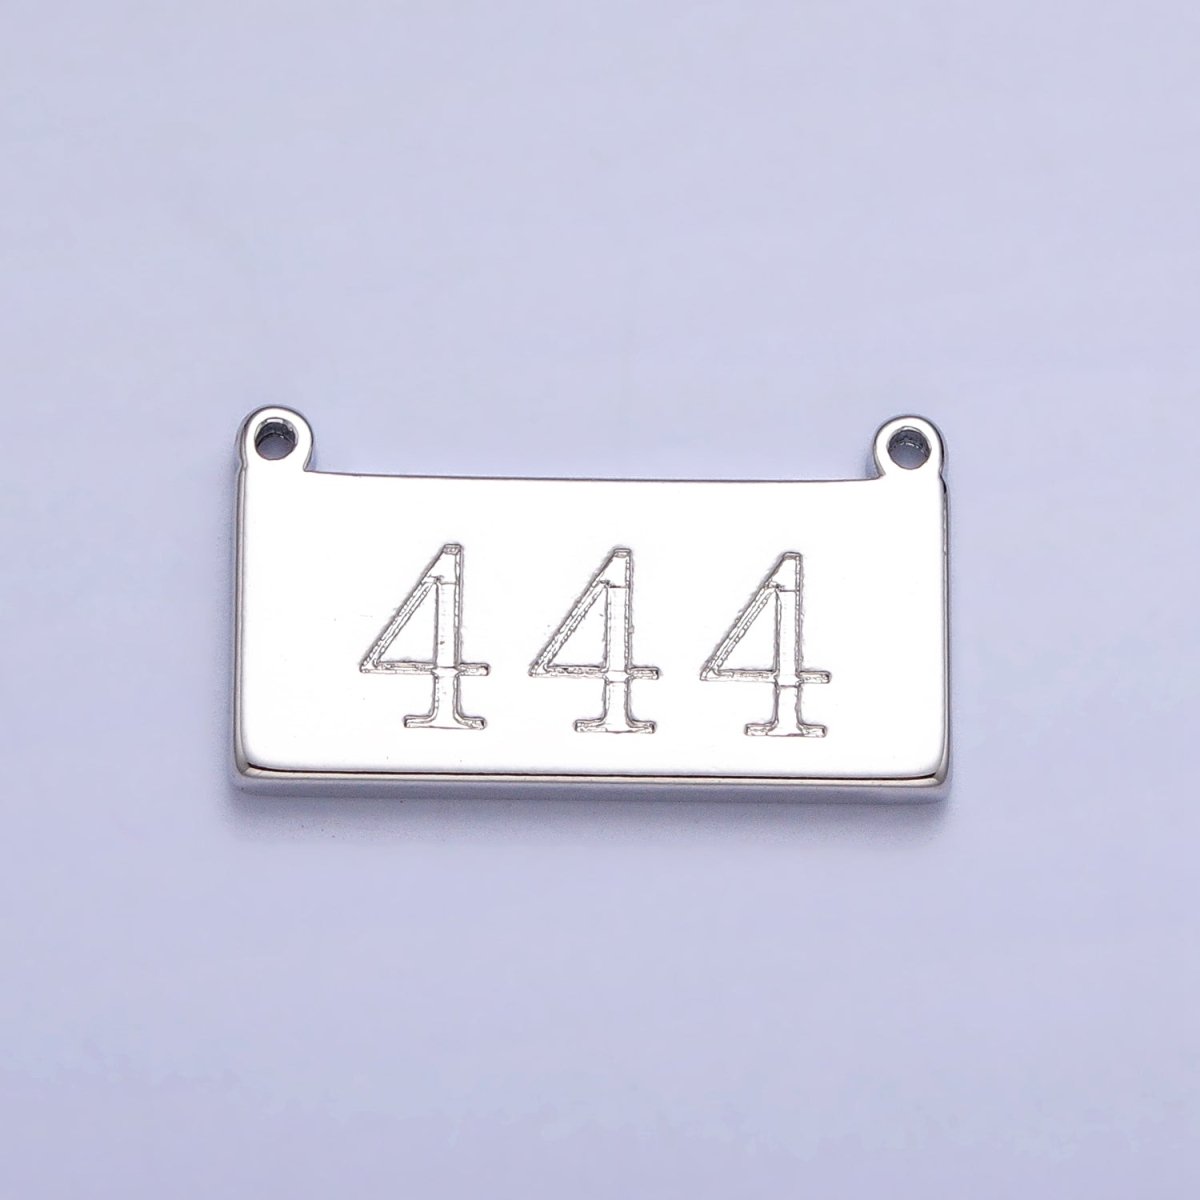 White Gold Filled Angel Number Numerology Engraved Rectangular Tag Charm Connector | AA781 - AA790 - DLUXCA